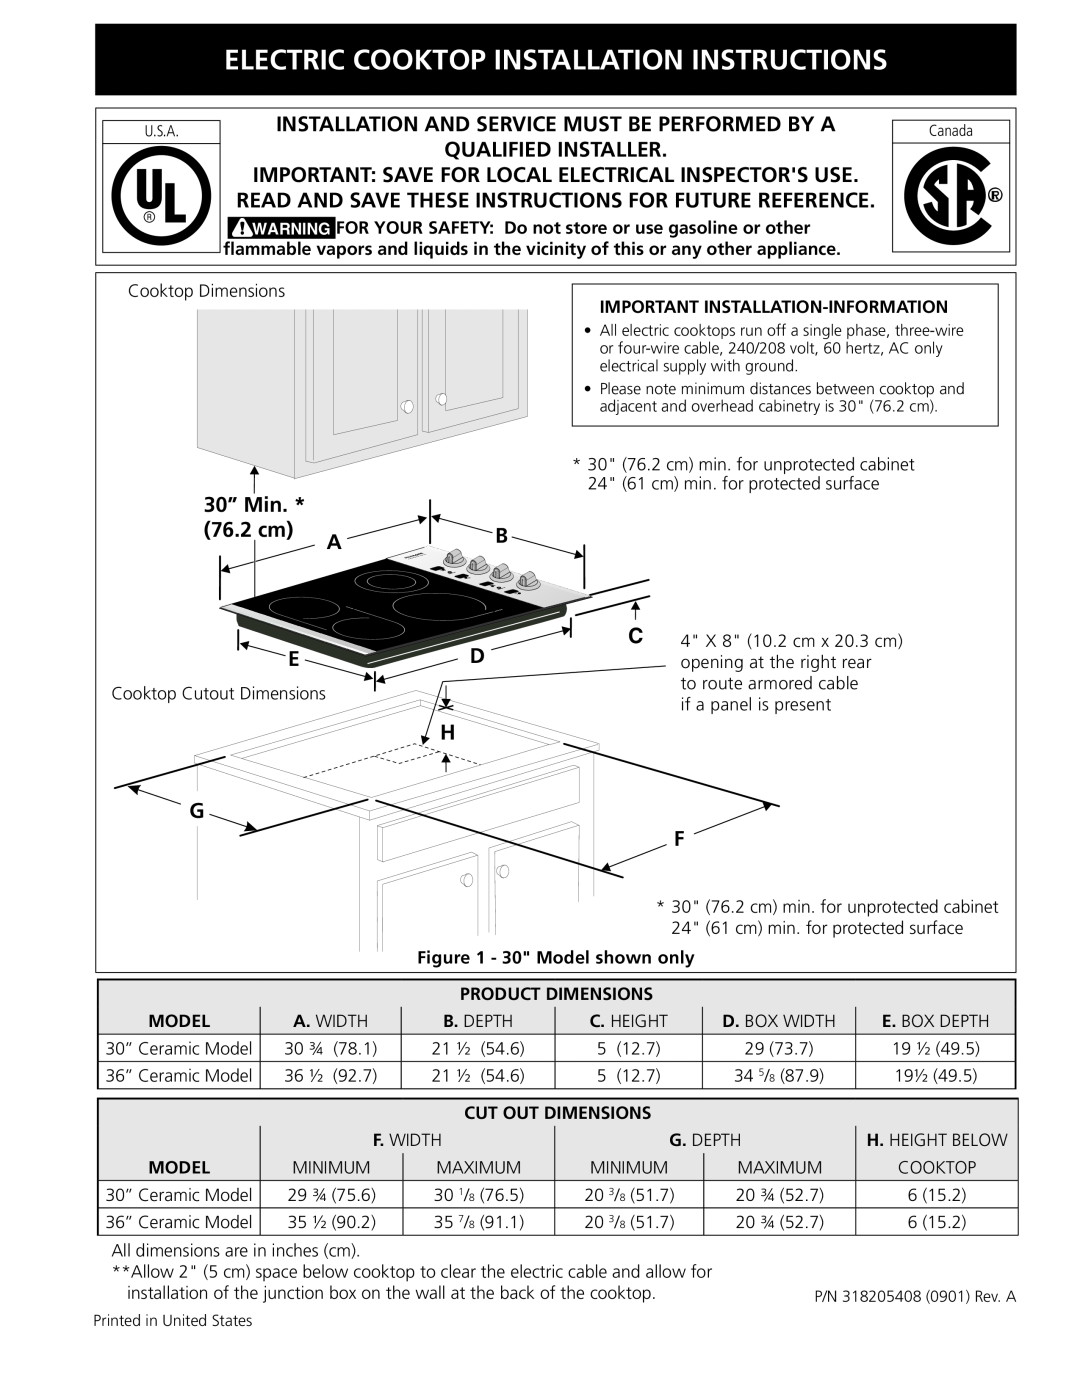 Frigidaire 318205408(0901) installation instructions Electric Cooktop Installation Instructions, 30” Min, 76.2 cm, H G F 